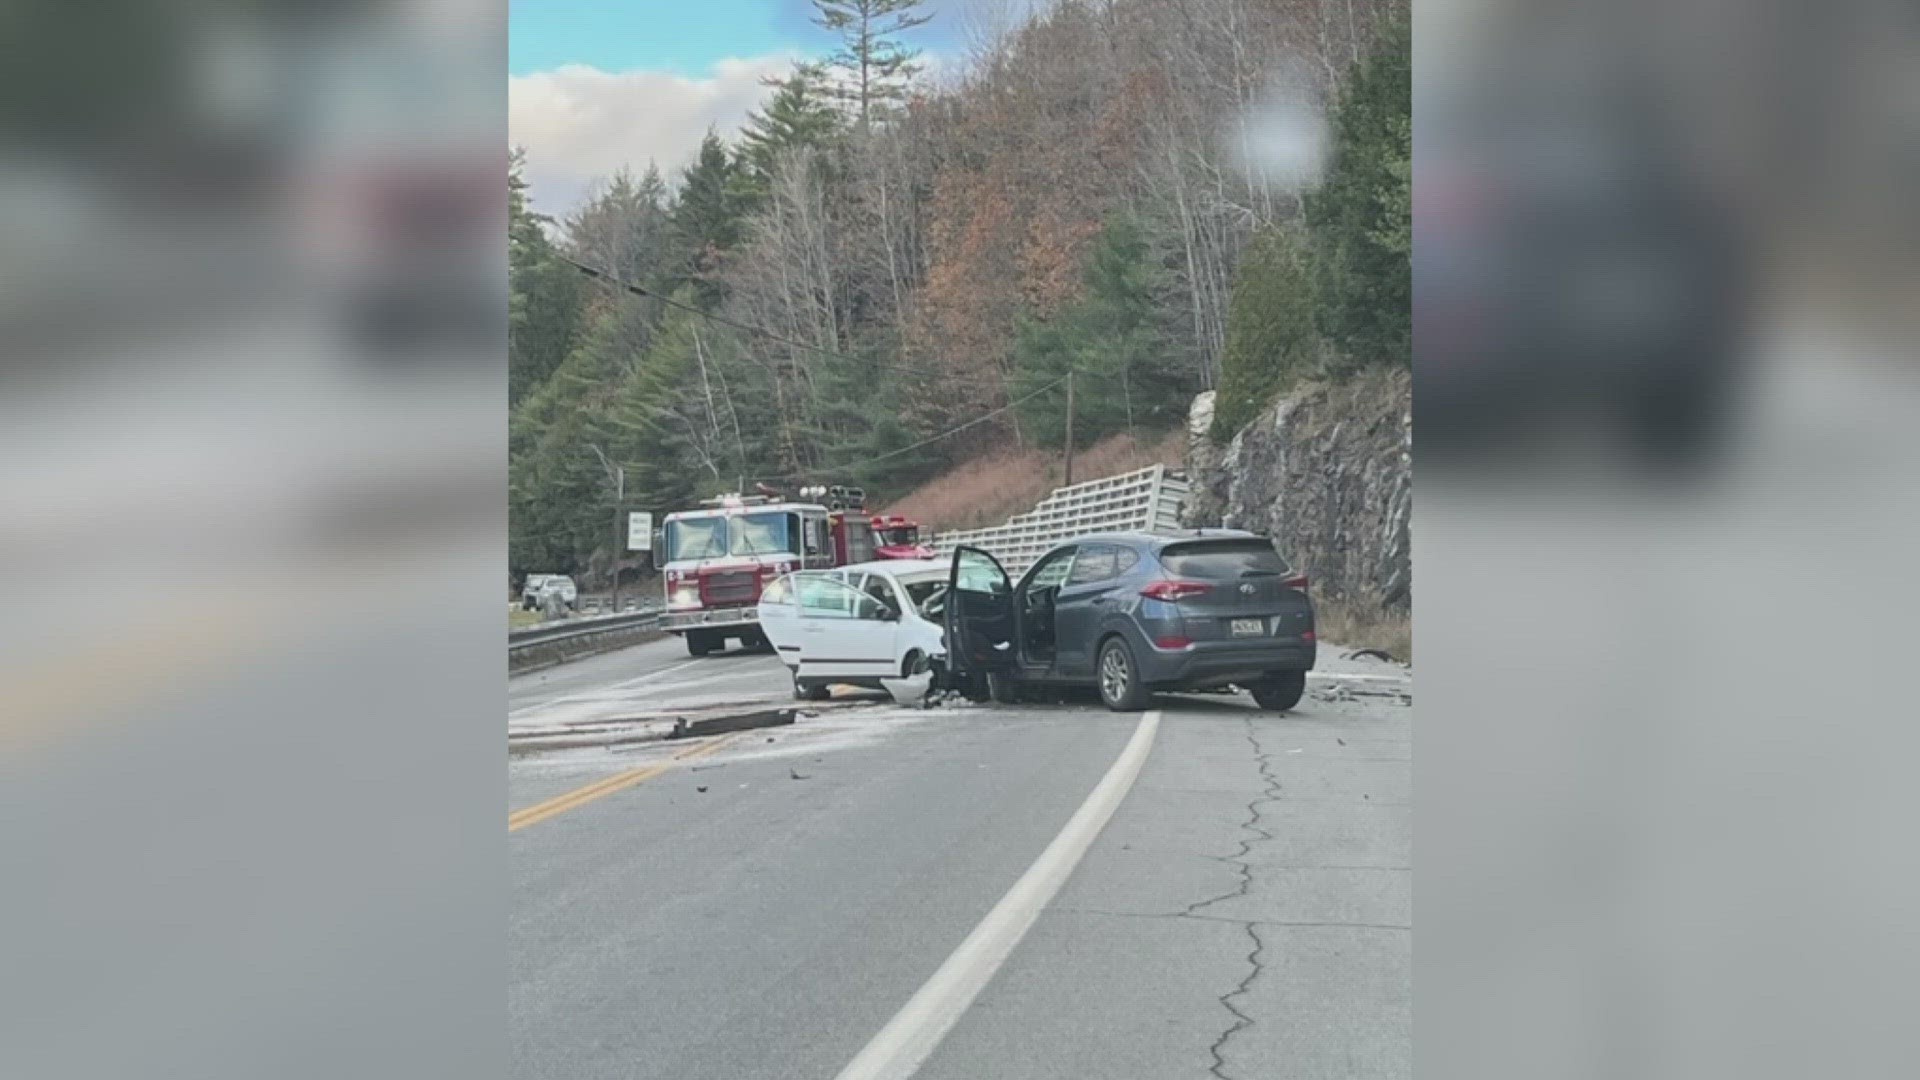 The head-on crash closed Route 26 for a few hours Saturday morning, as police investigated.